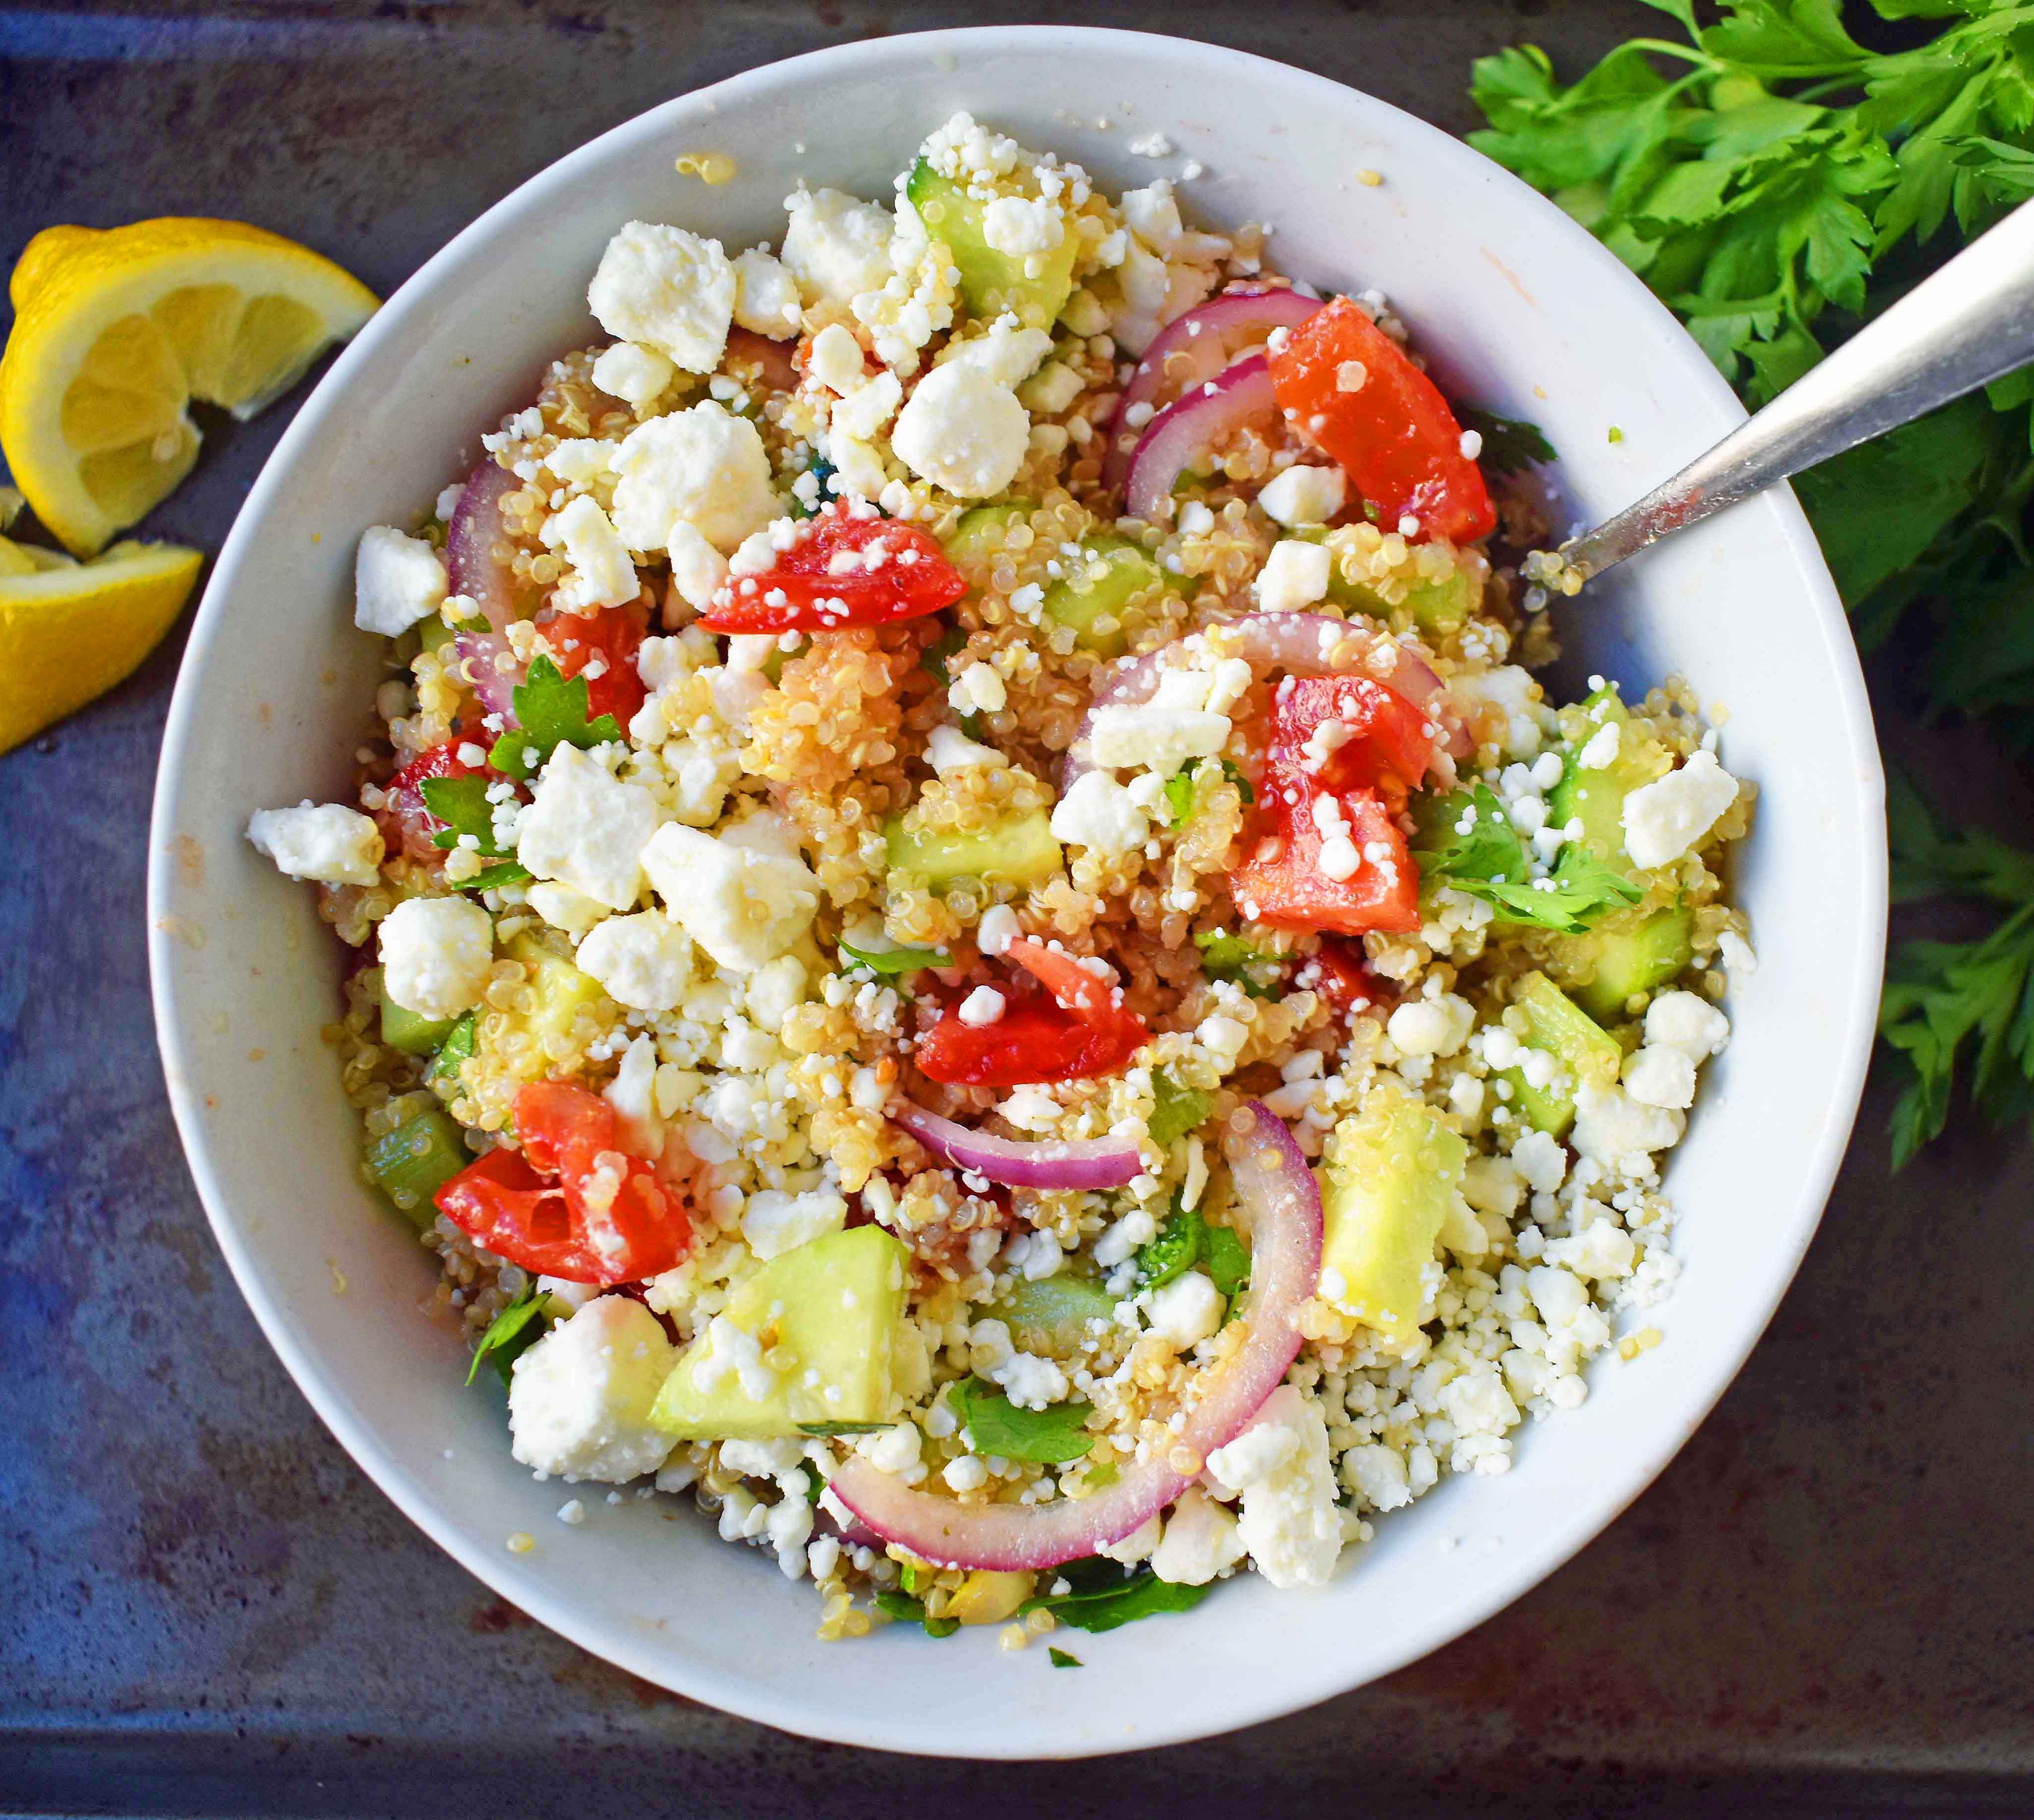 Mediterranean Quinoa Salad with feta cheese, tomatoes, cucumber, and red onions, all tossed in a red wine vinaigrette. www.modernhoney.com